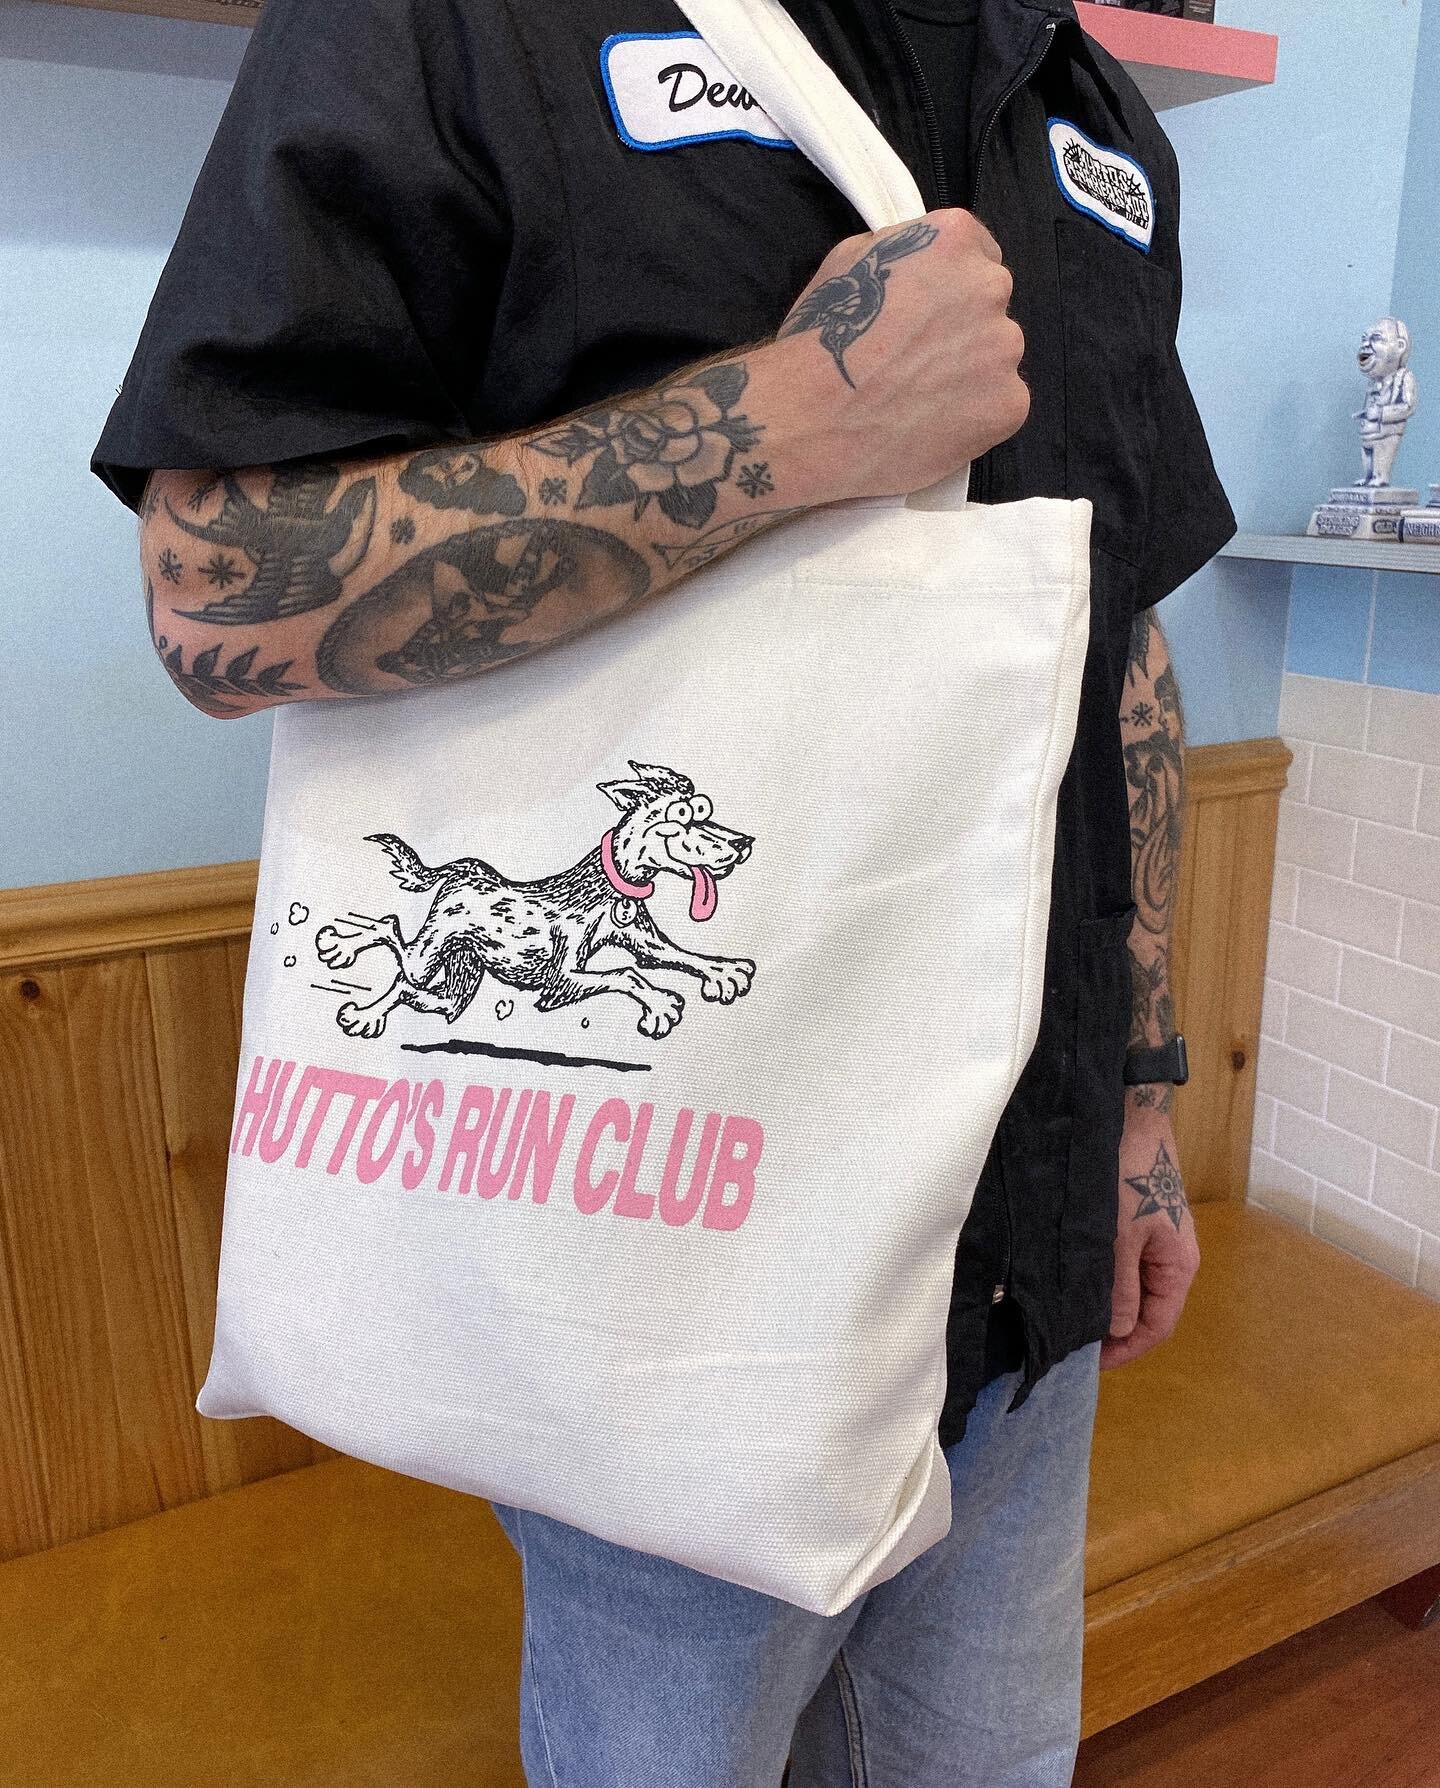 Totes now available while stocks last 😎